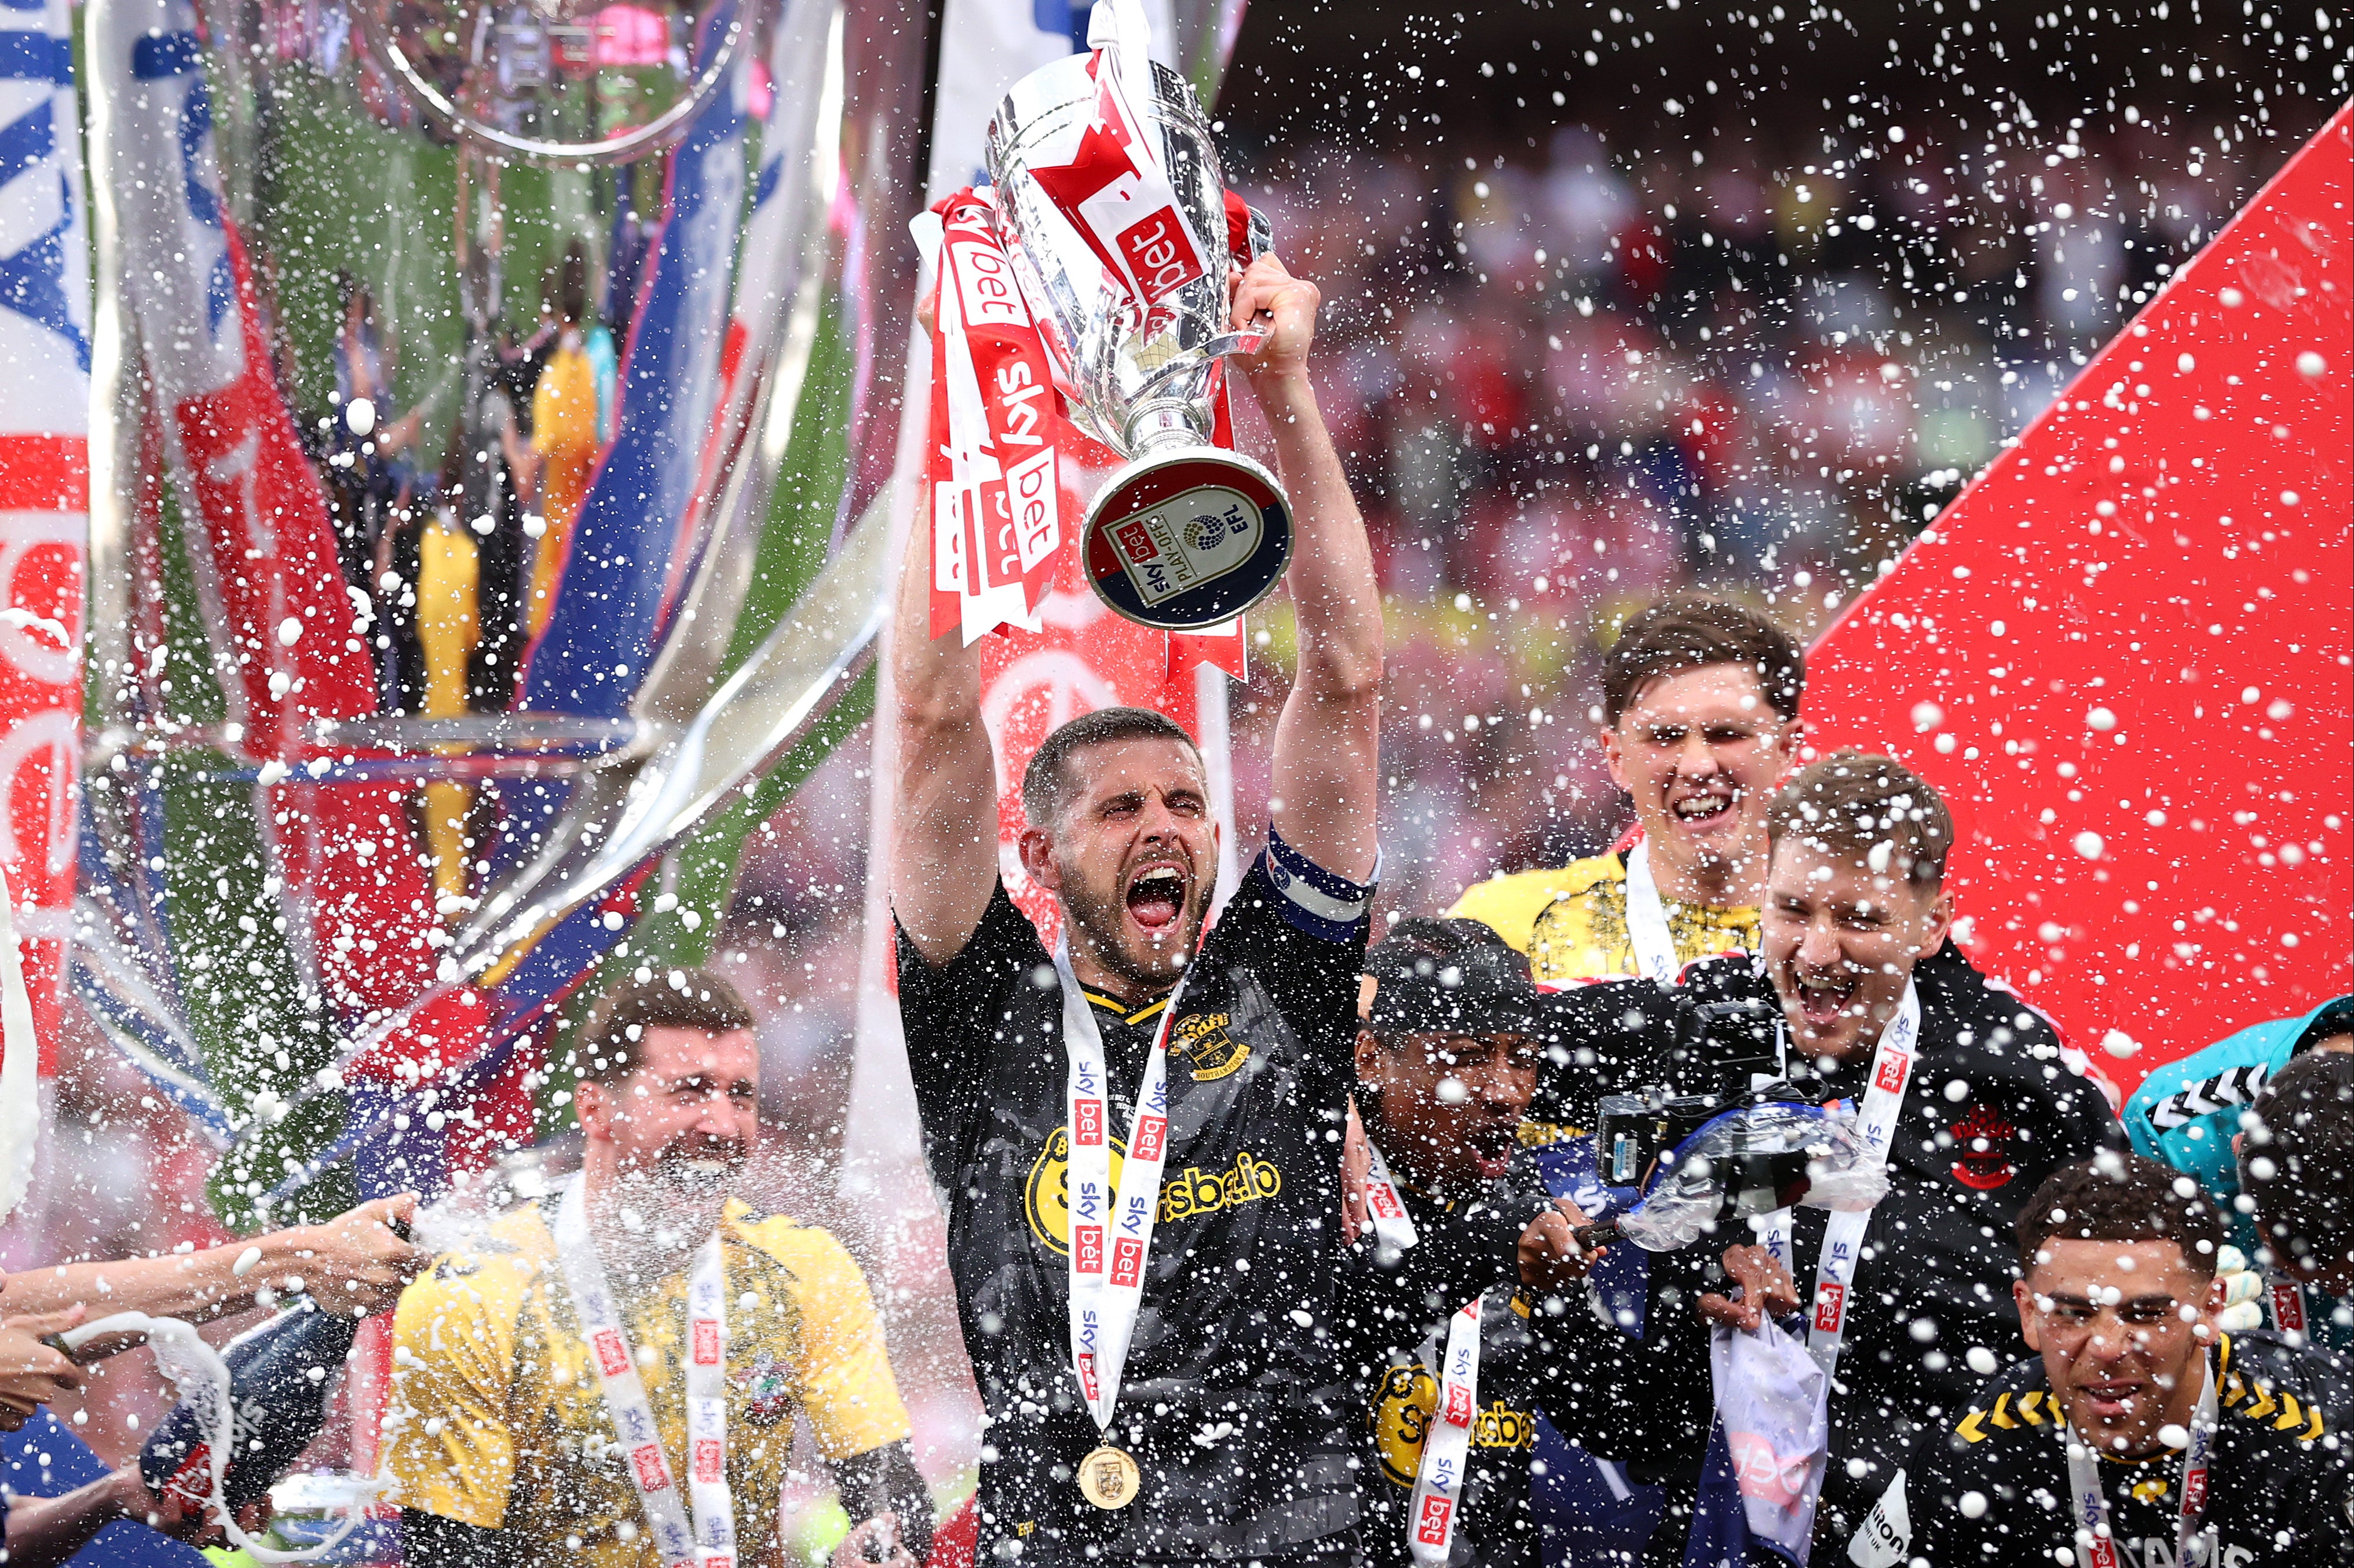 Southampton’s Championship play-off final victory will earn the club upwards of ?140m